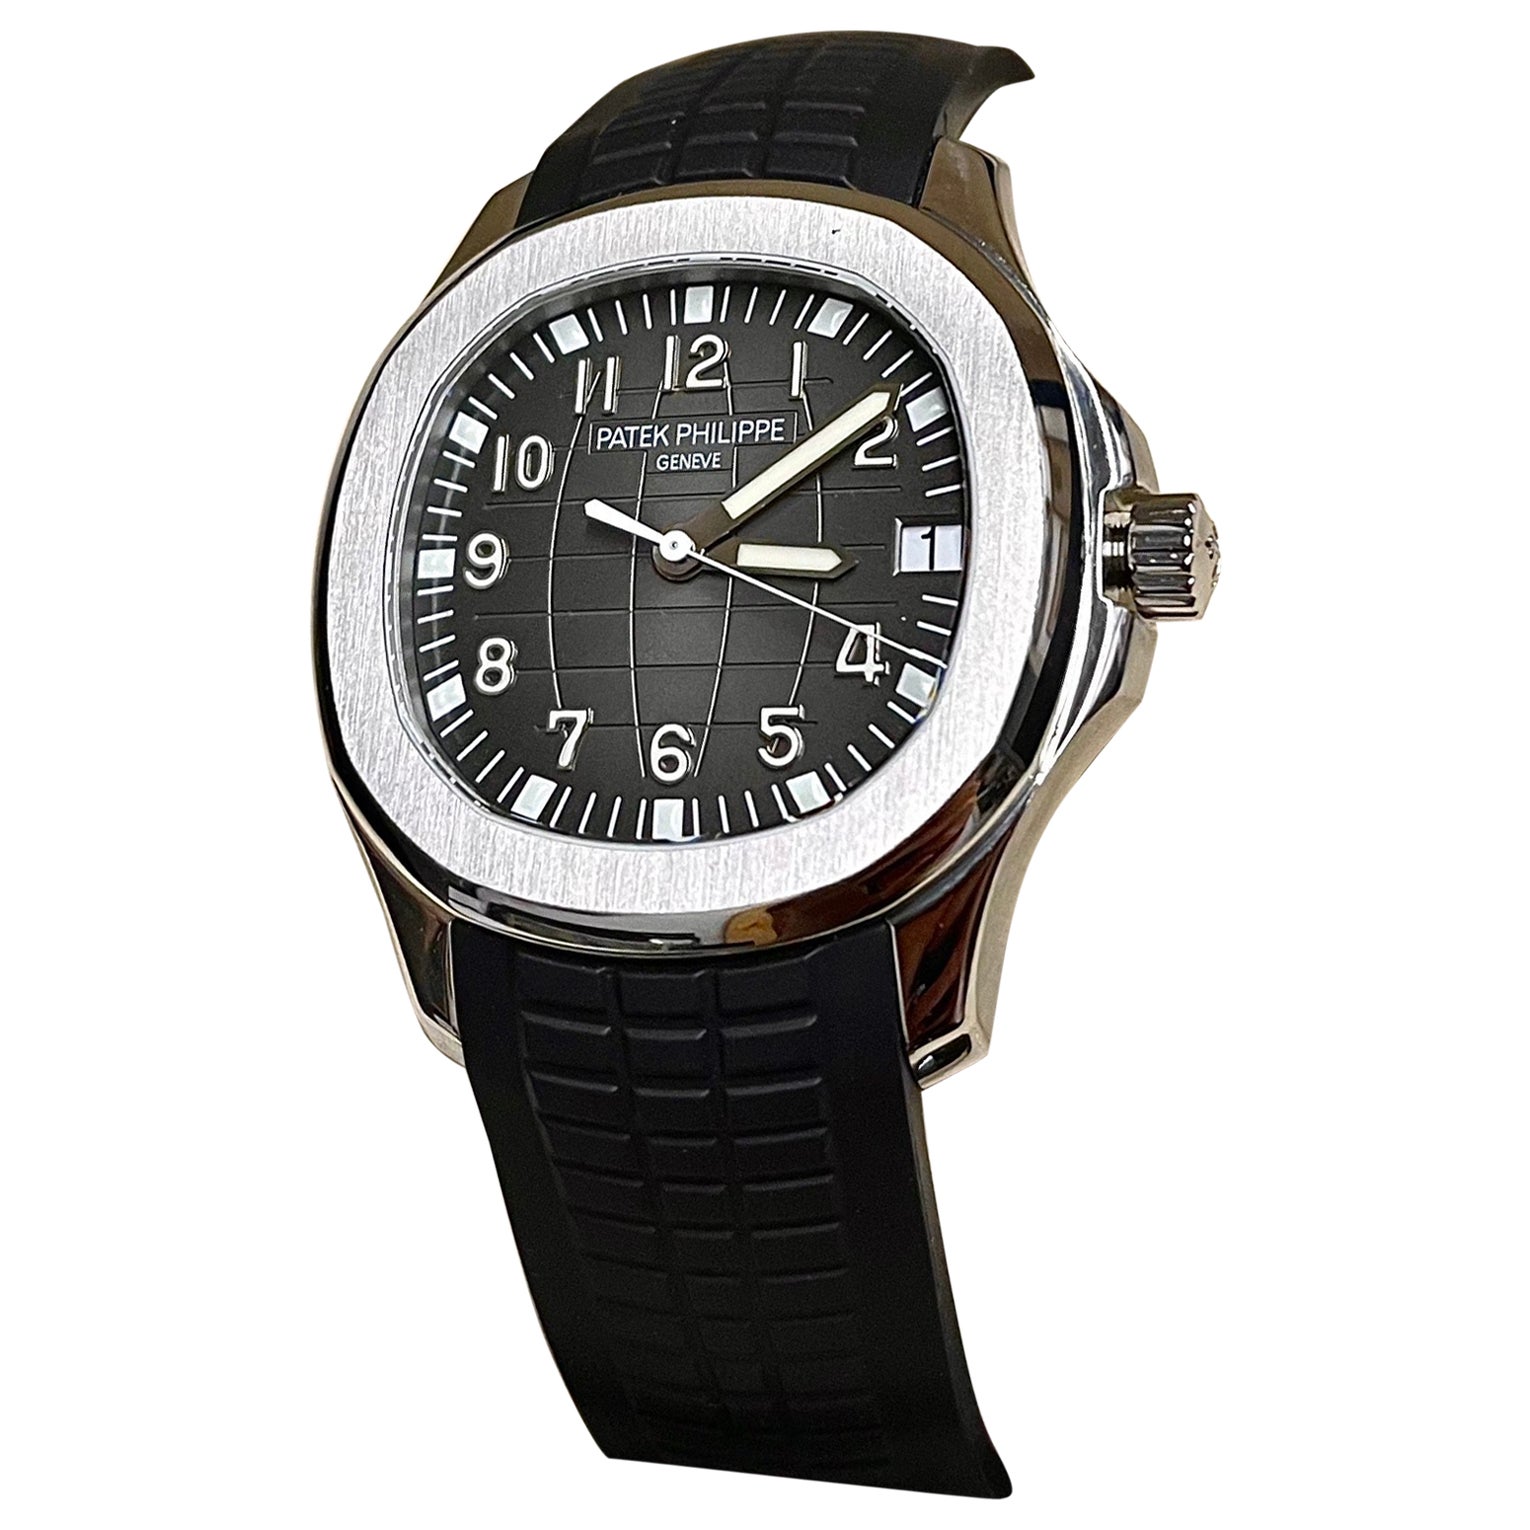 Patek Philippe & Tiffany's Co-Branded AQUANAUT REF#5165_001 Automatic Watch For Sale